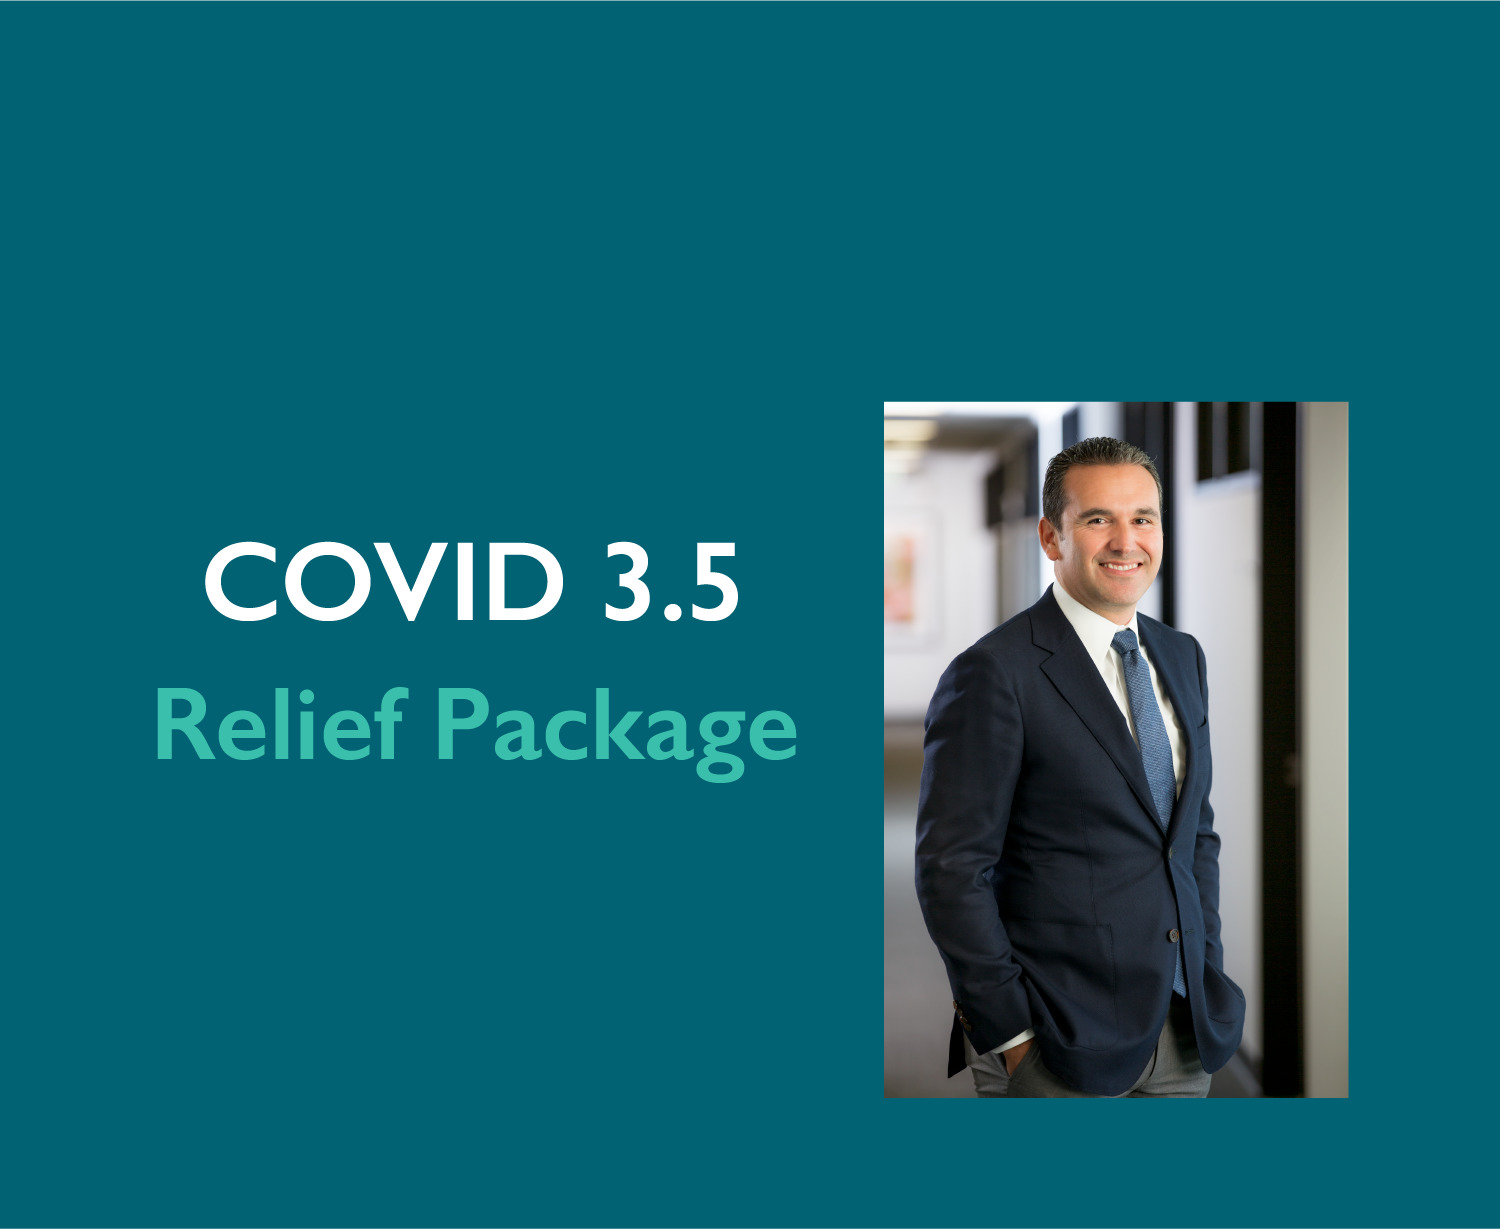 COVID 3.5 Relief Package